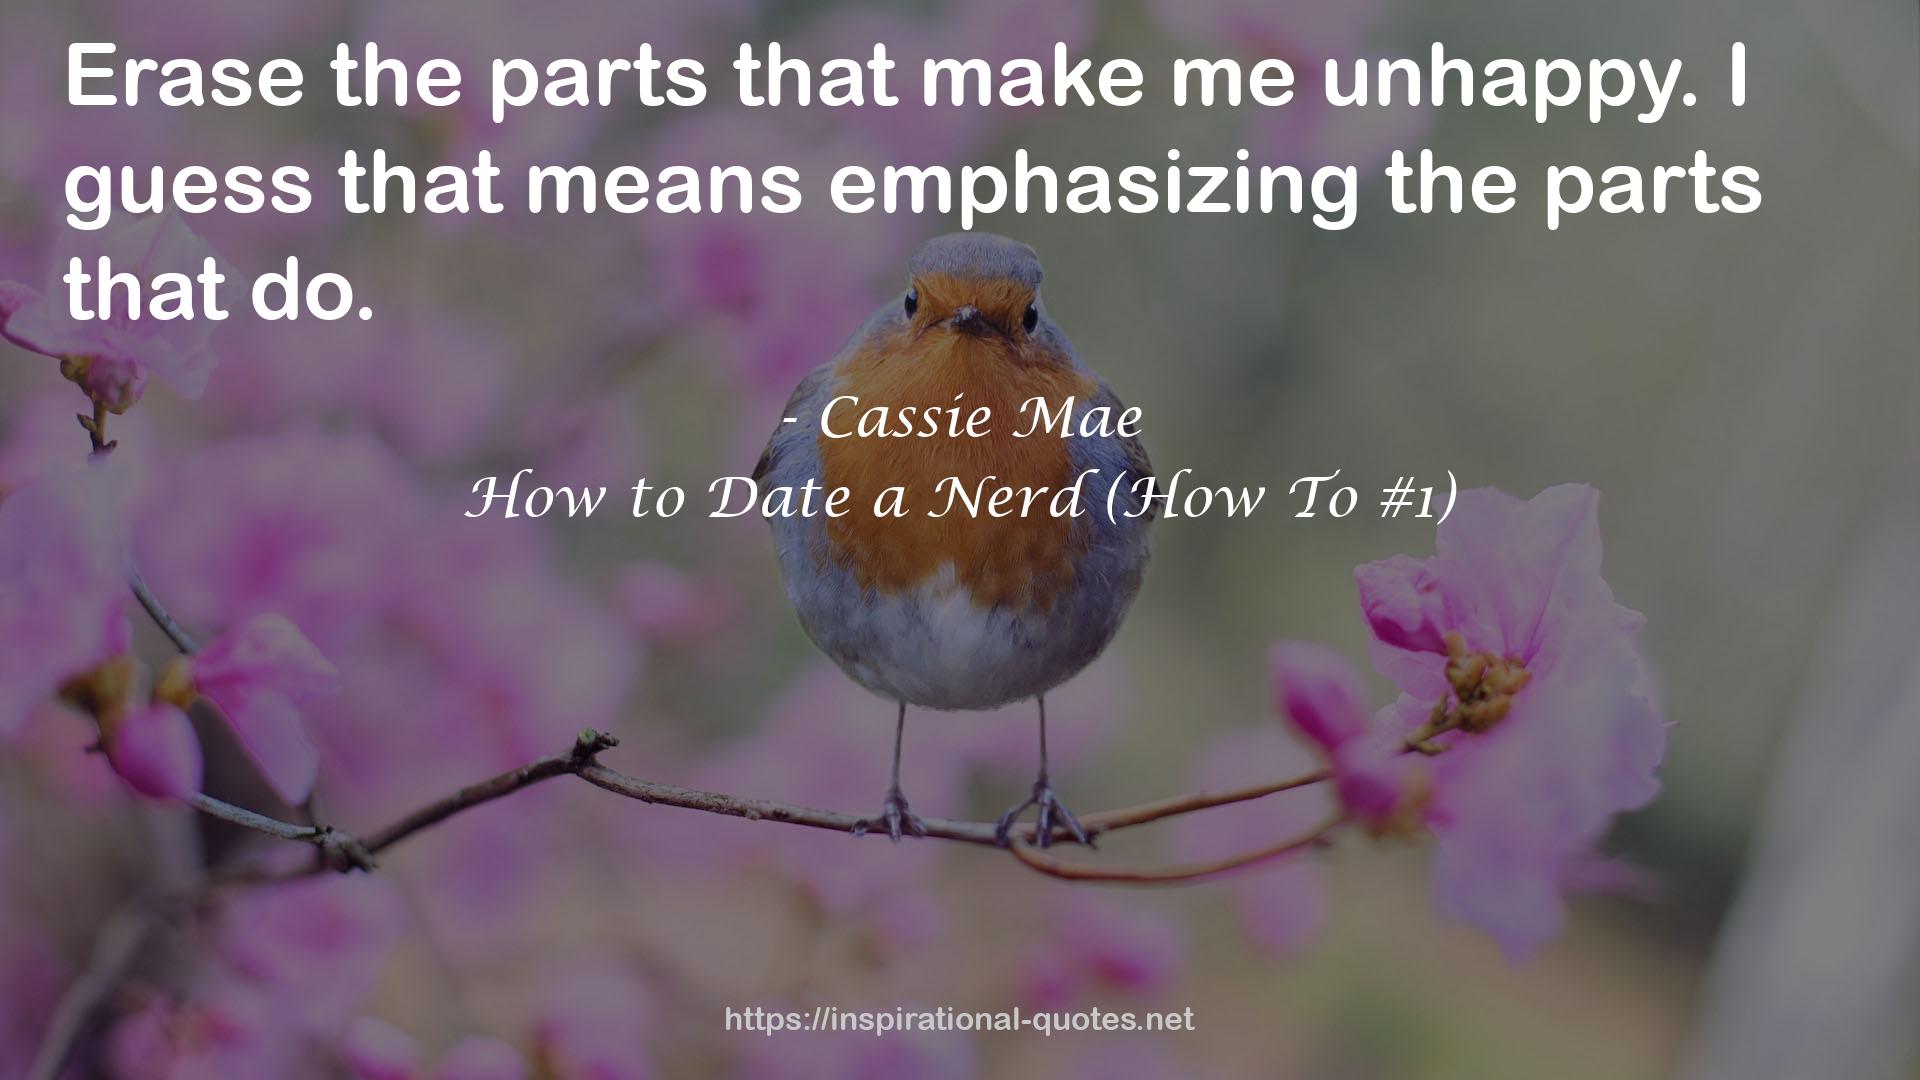 How to Date a Nerd (How To #1) QUOTES